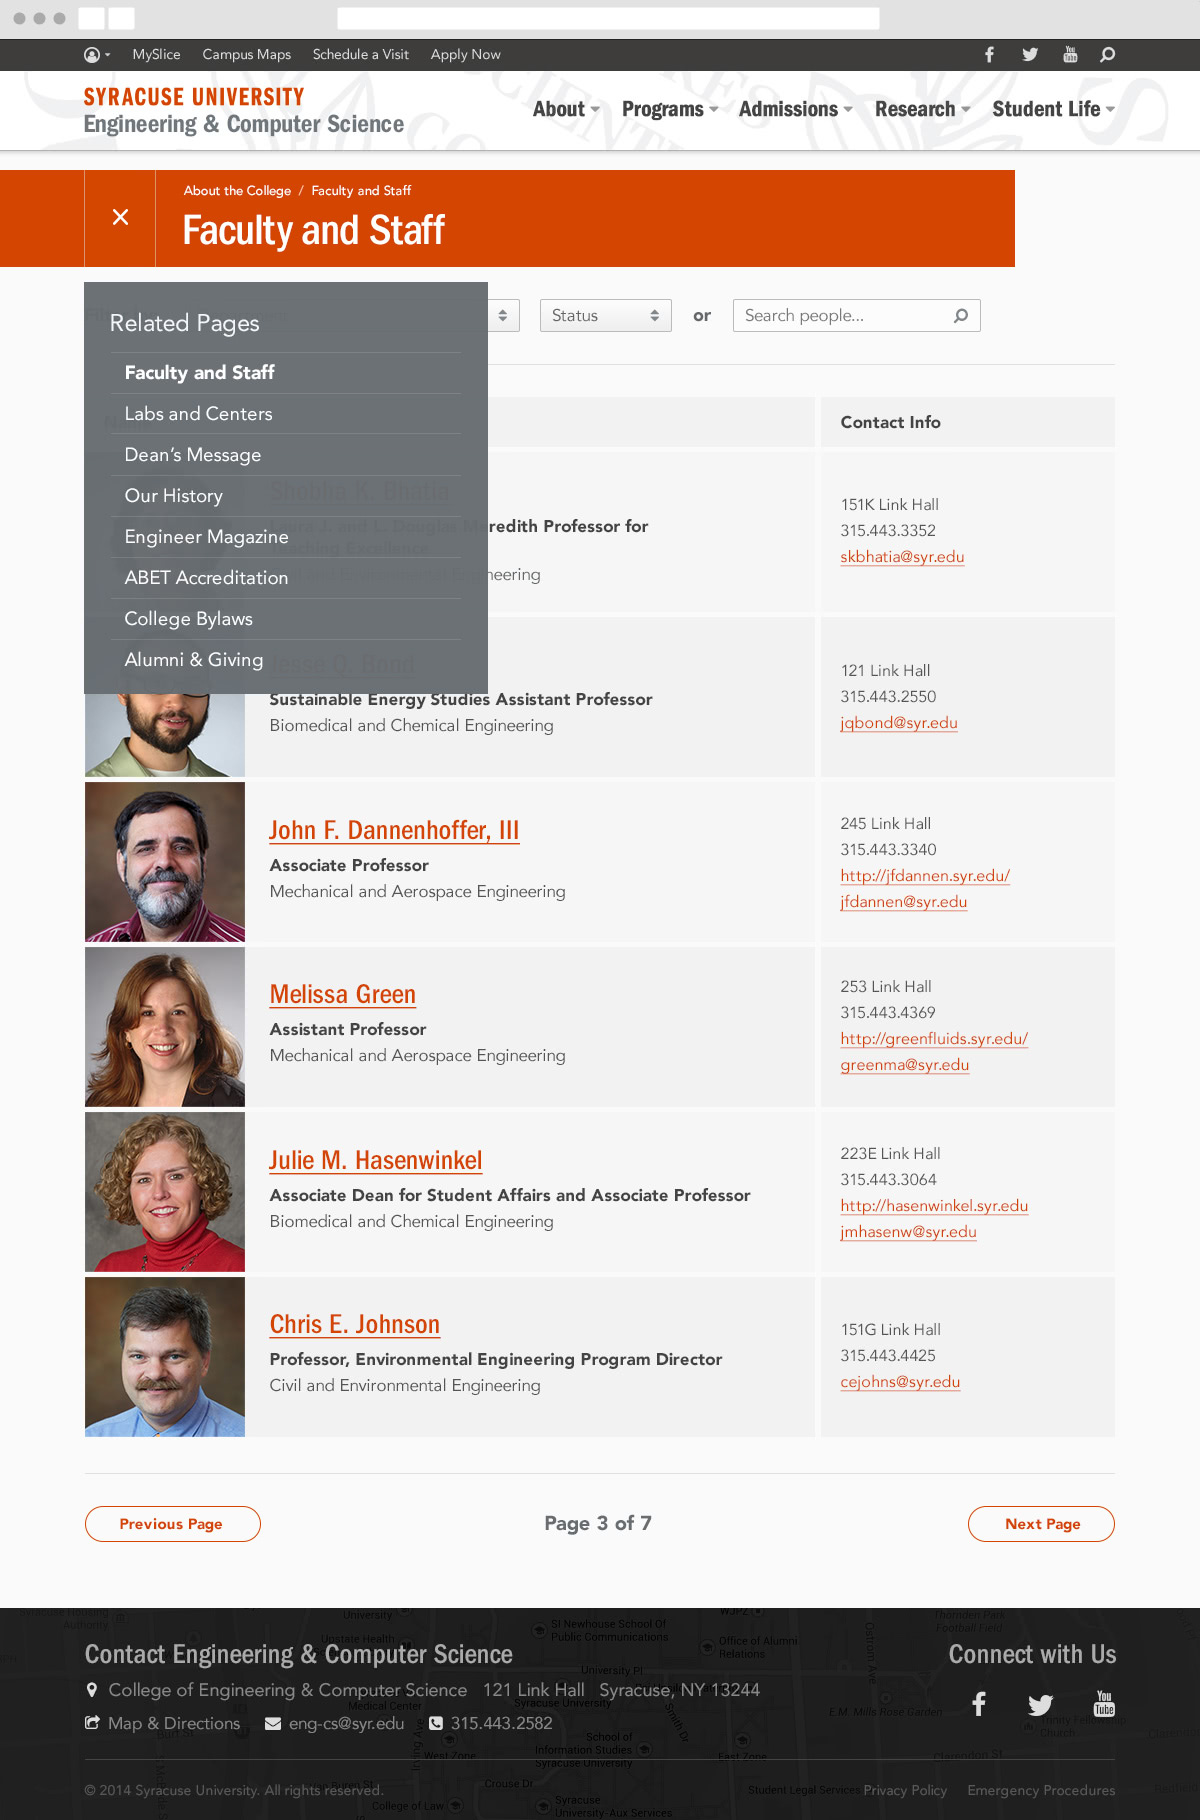 Faculty and staff directory page